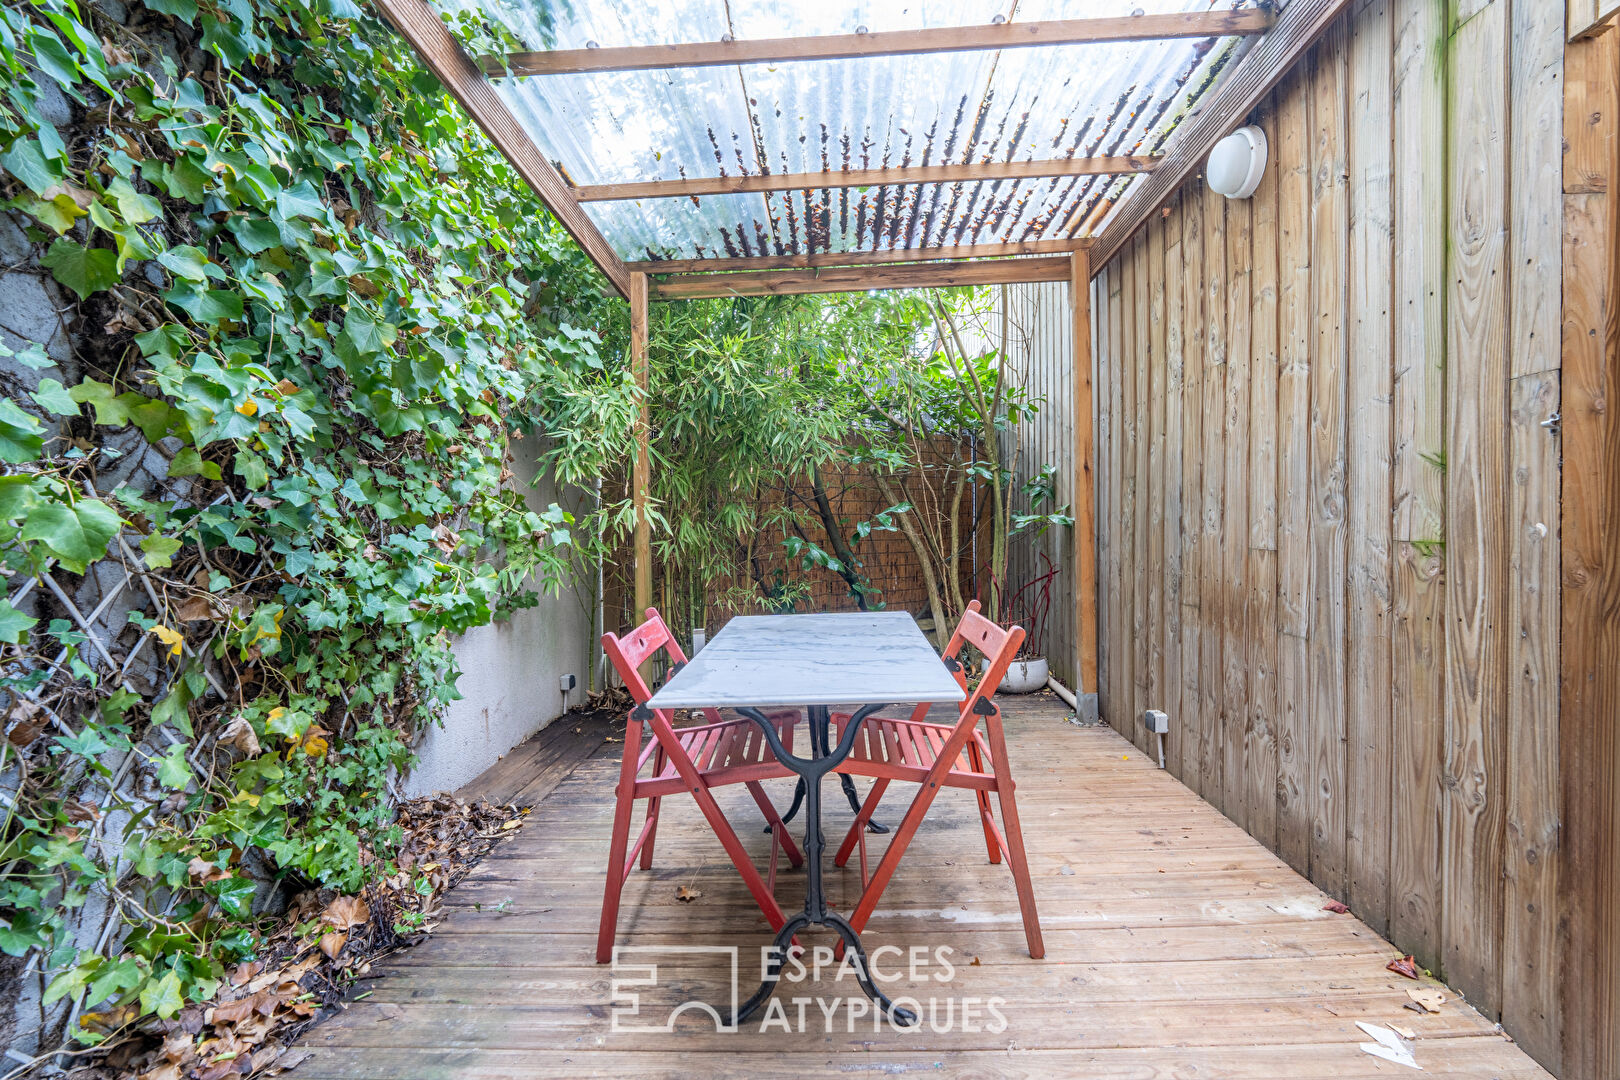 The discreet one and its cozy garden in the very center of Tours